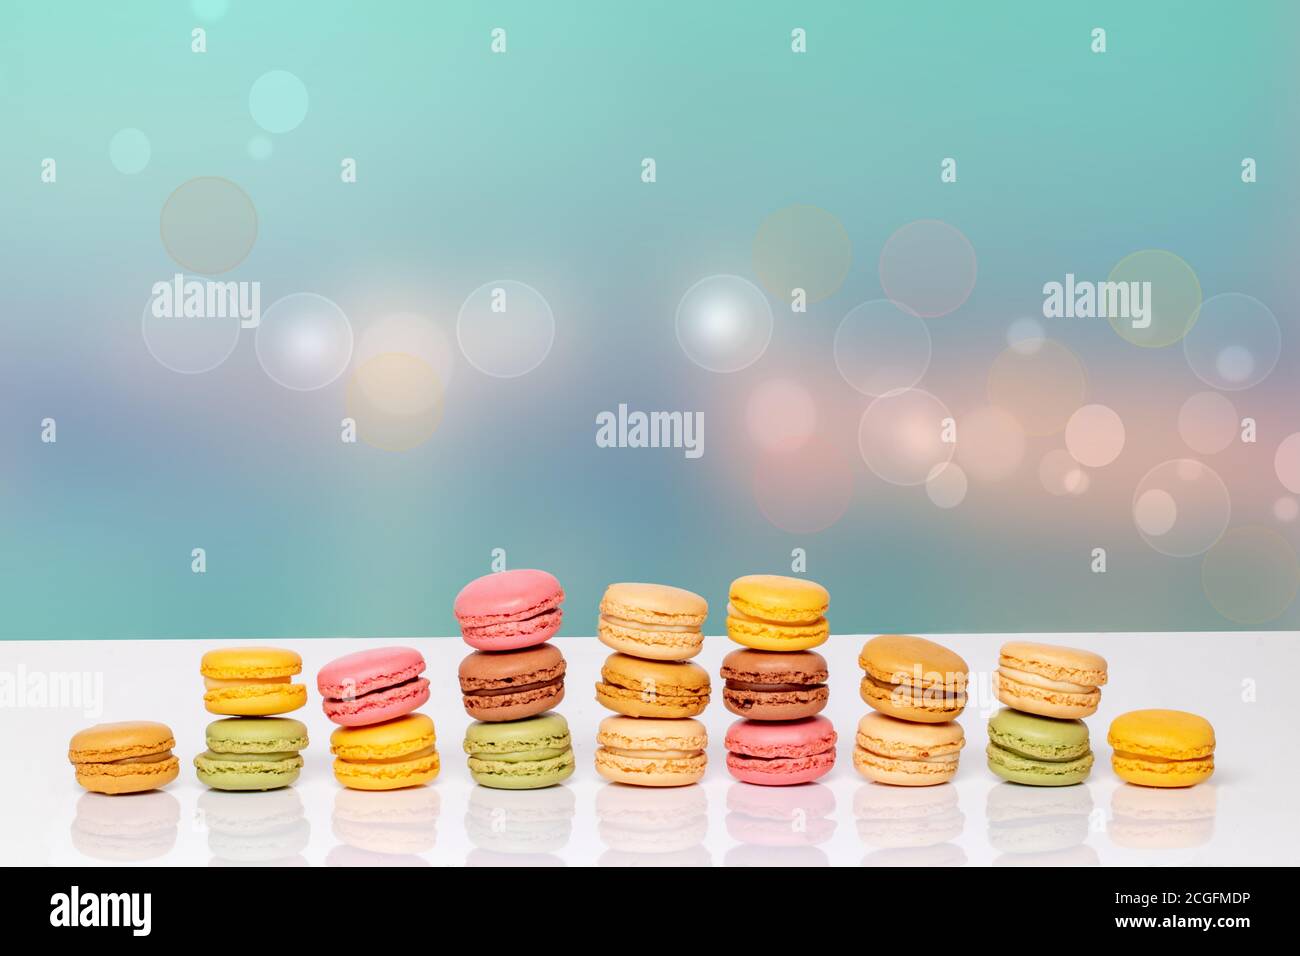 Macaron pyramids. Close-up of colourful French macaroons in shape of a pyramid on a white table against abstract bright pastel colored background. Adv Stock Photo